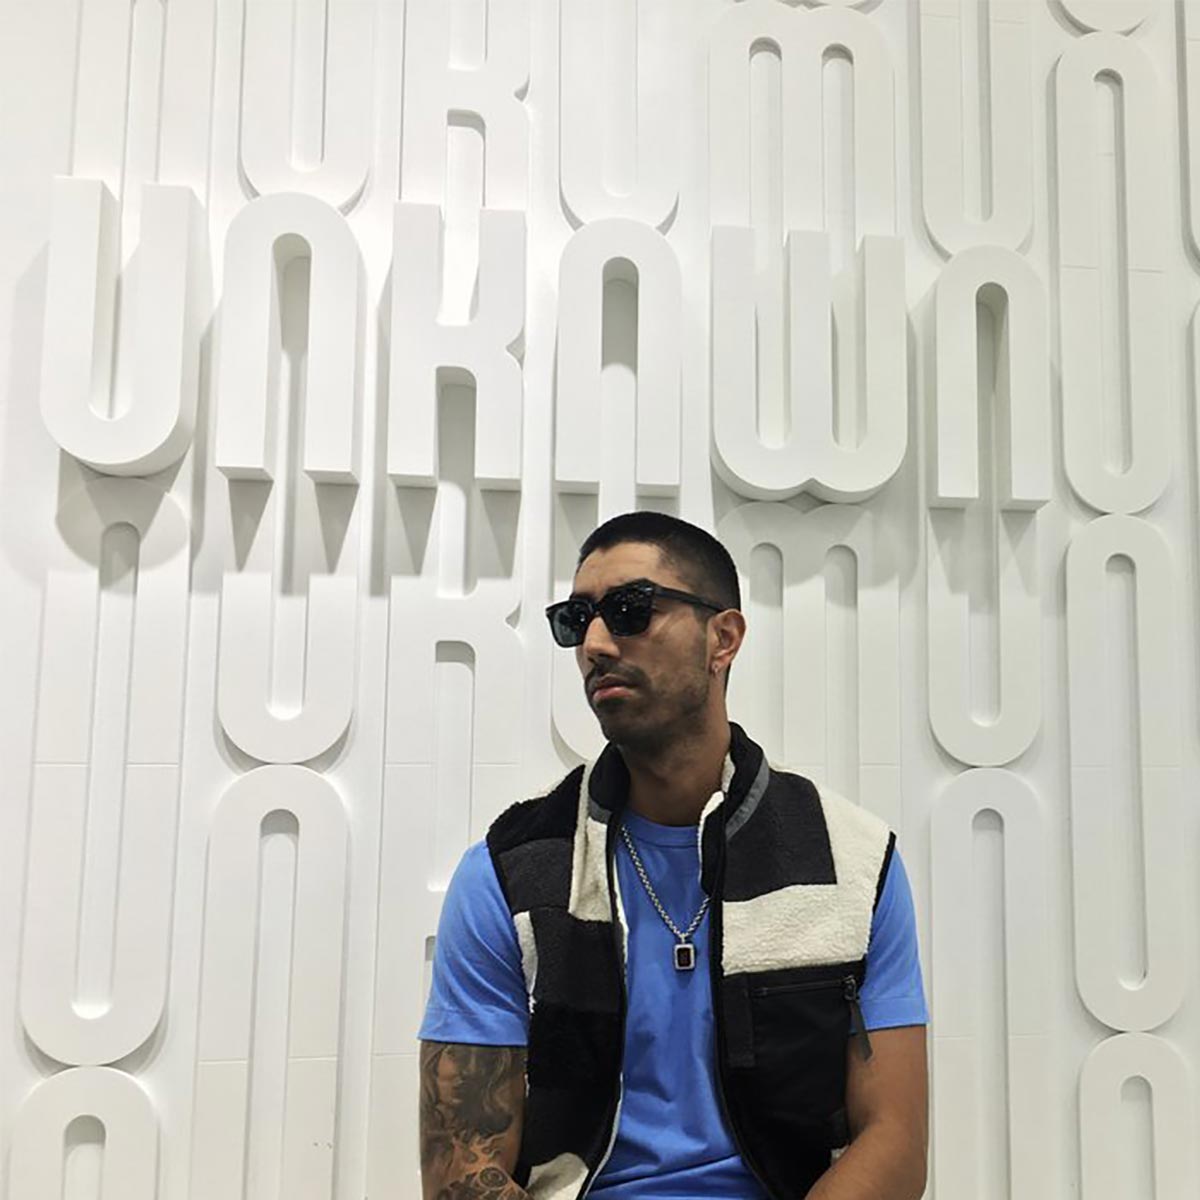 Man wearing sunglasses inside, in front of a wall with Unknwn in relief.